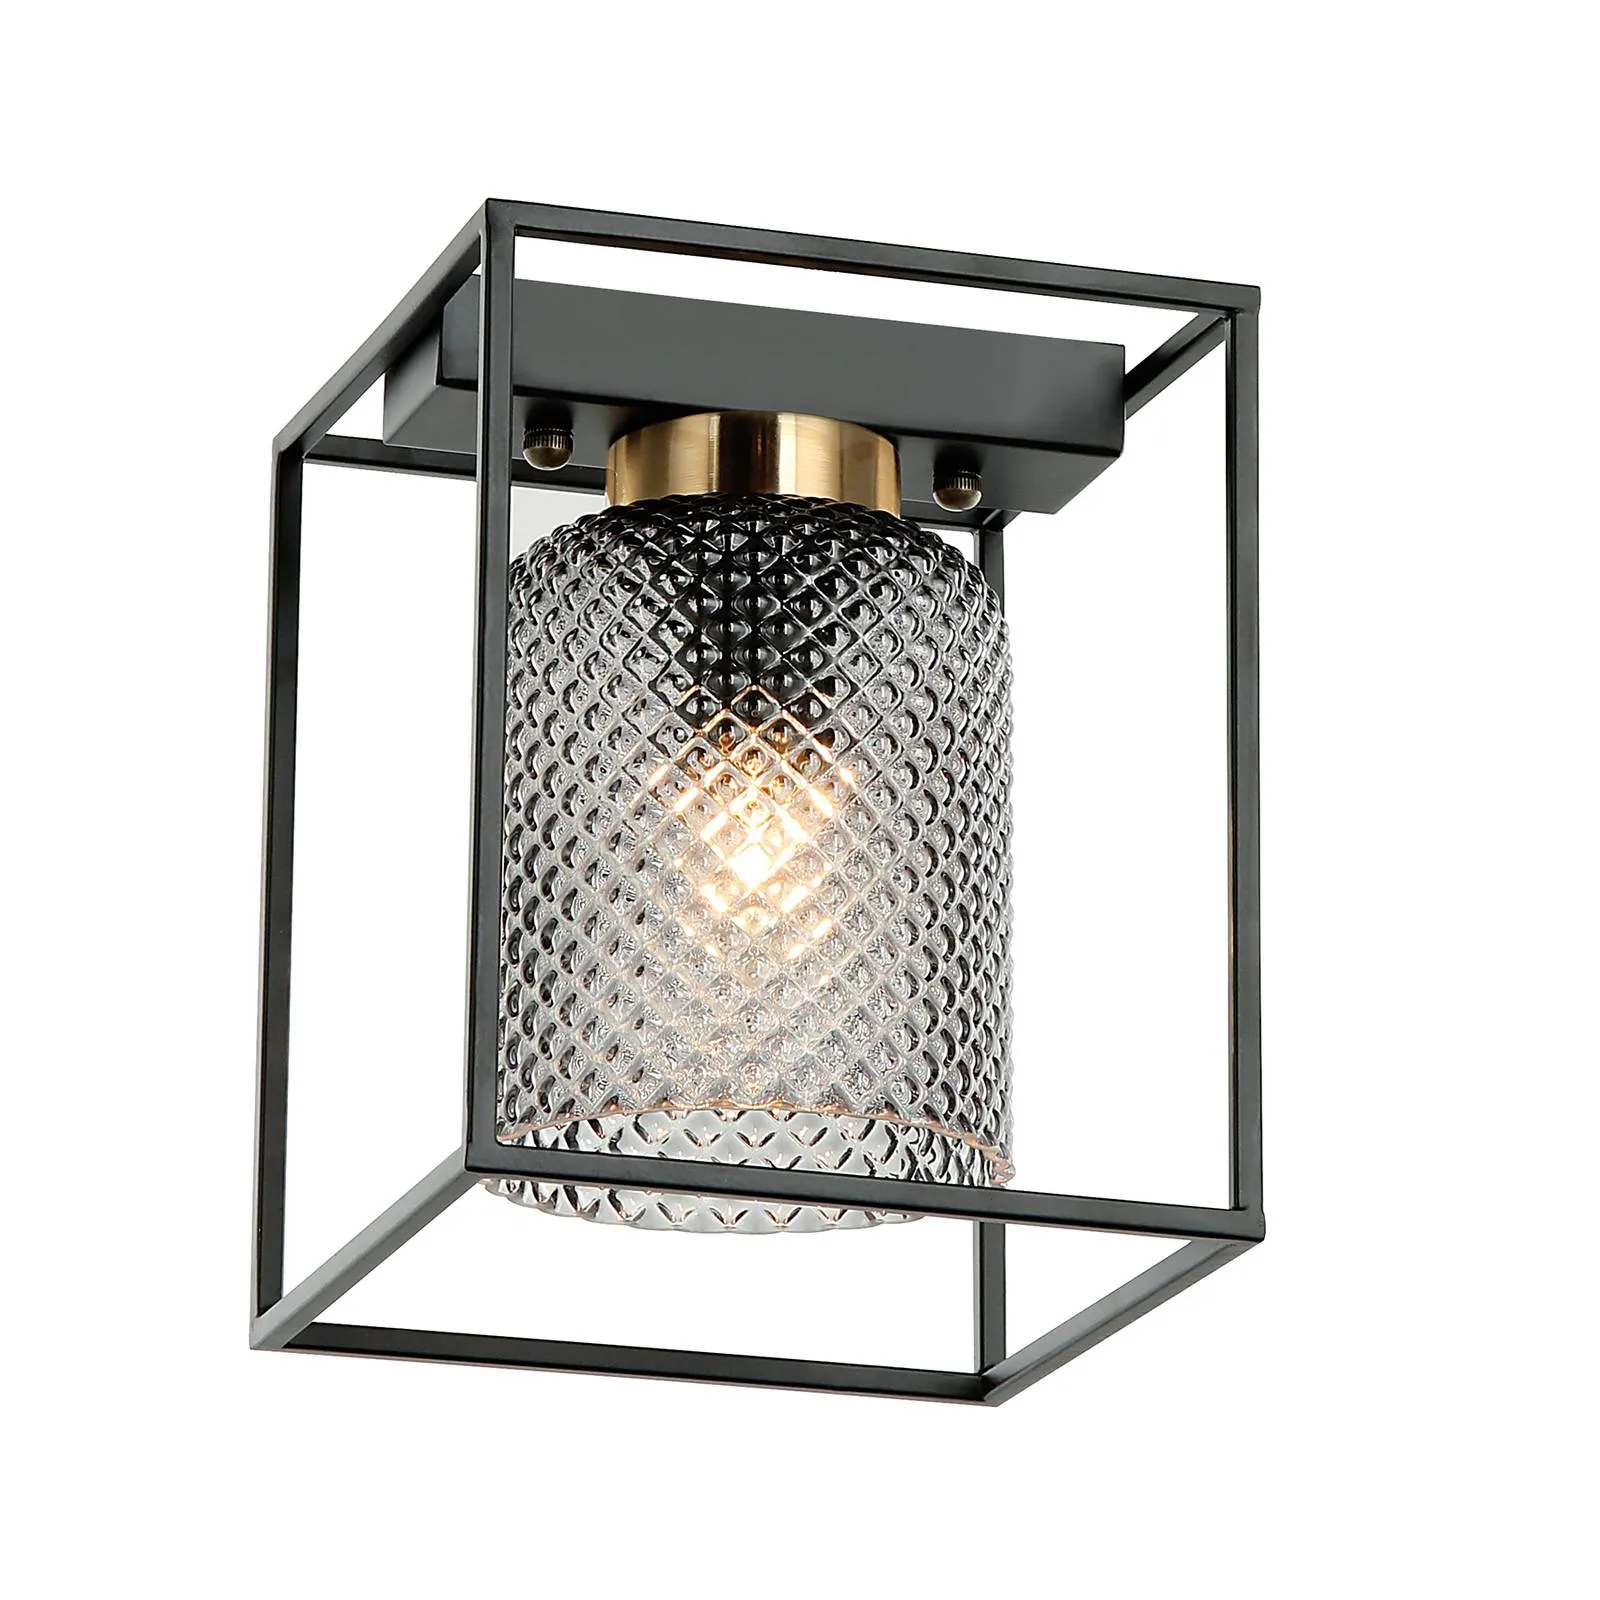 Zac ceiling light in a cage look